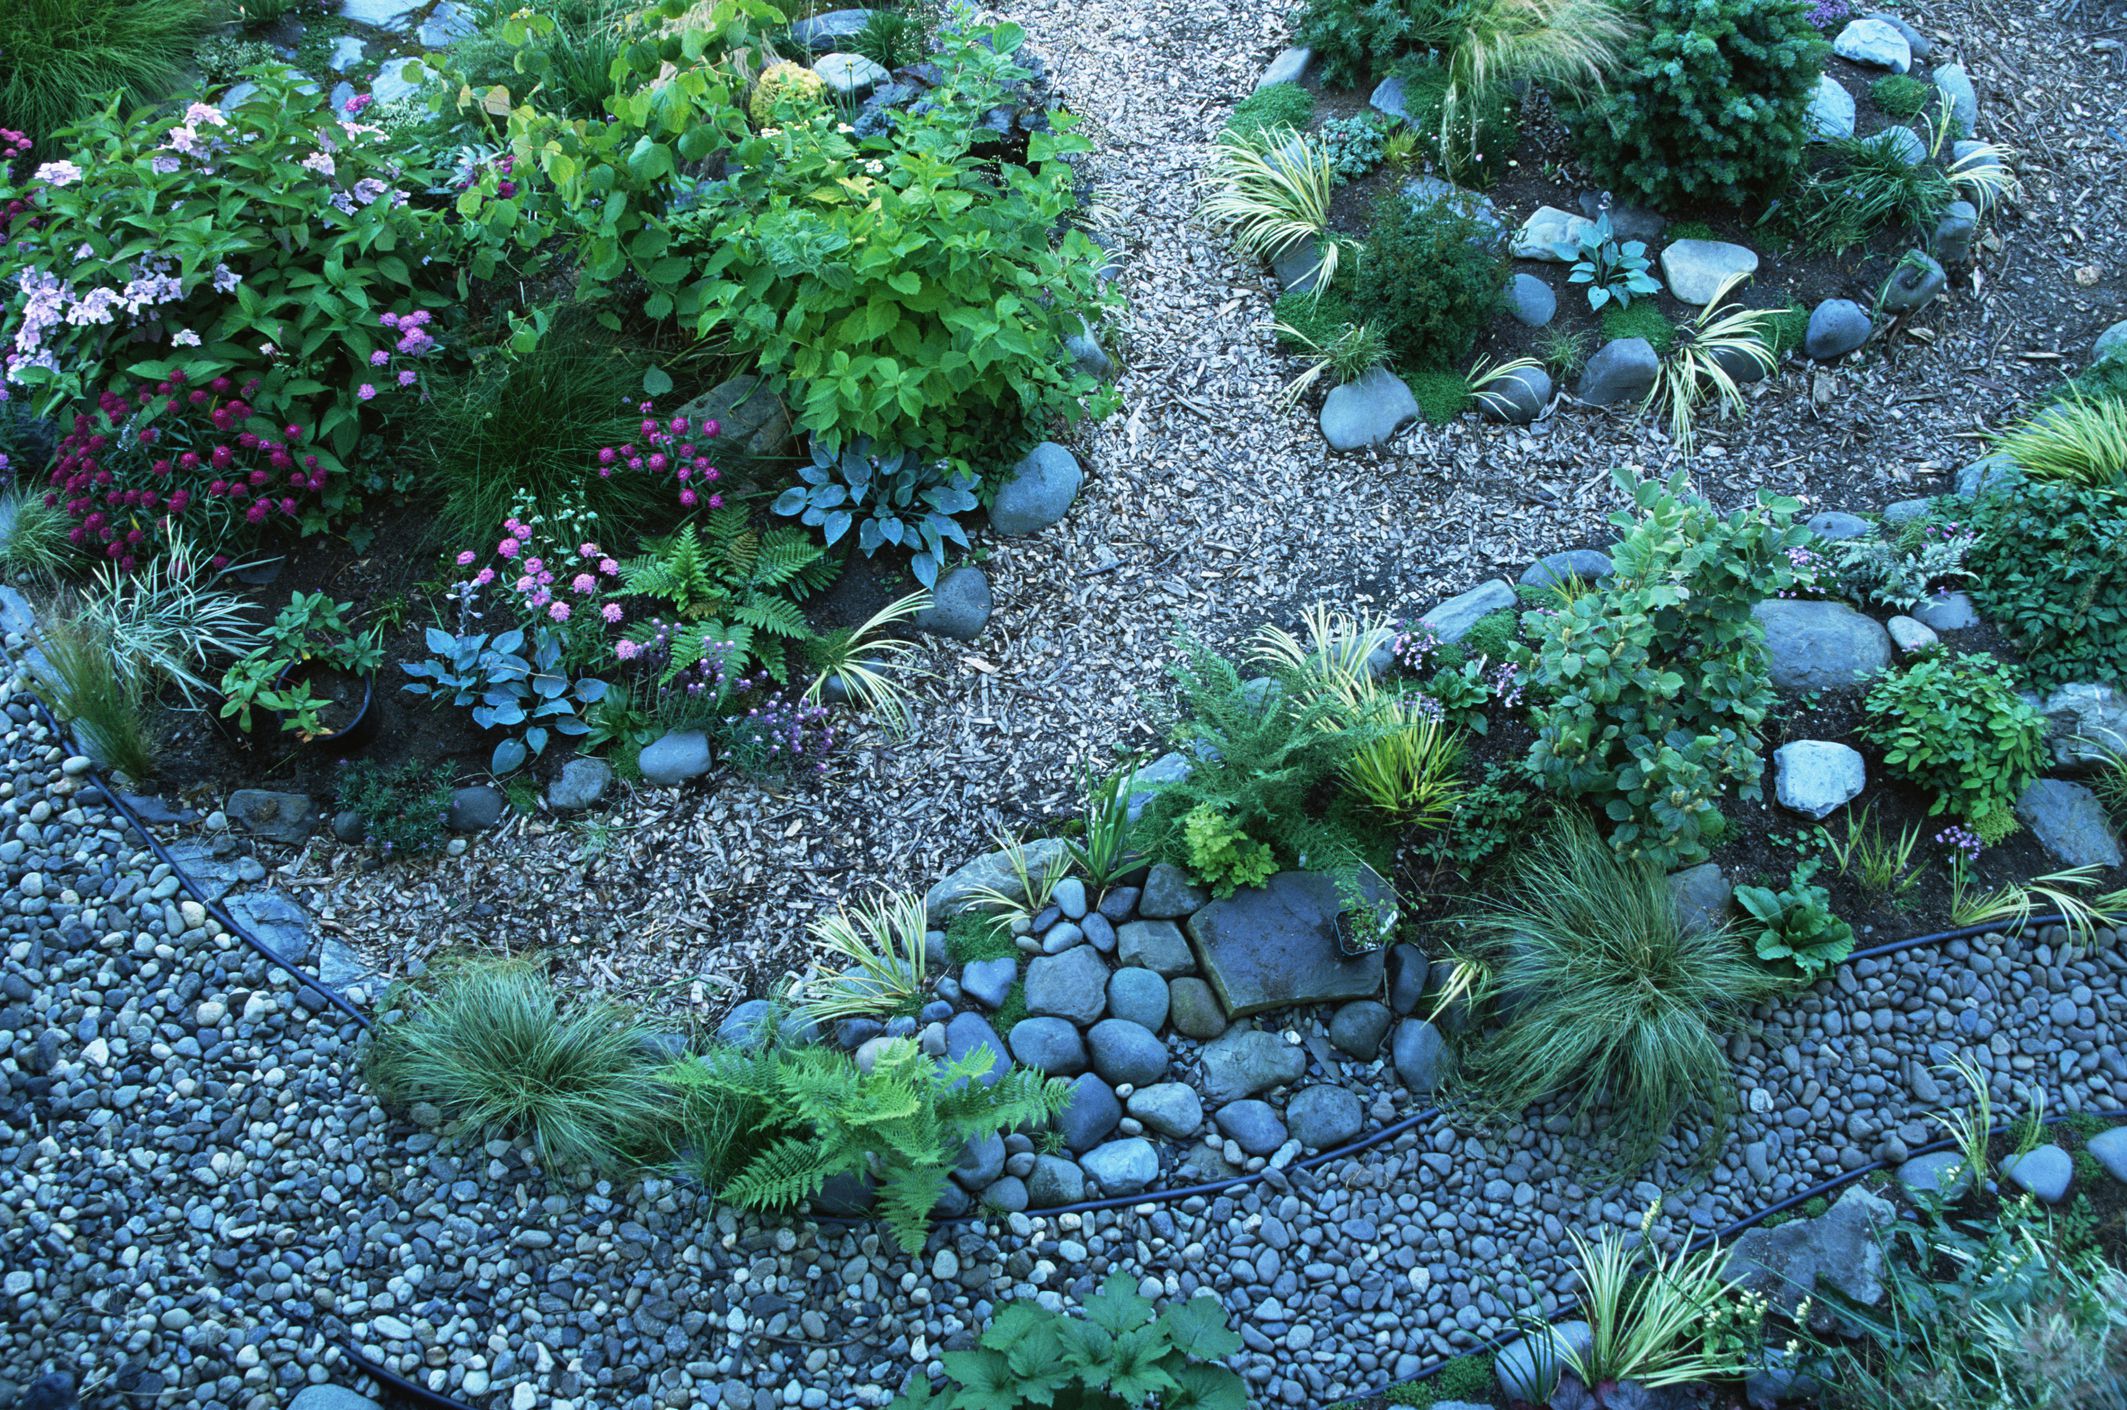 Creatice Flower Gardens With Rocks for Small Space